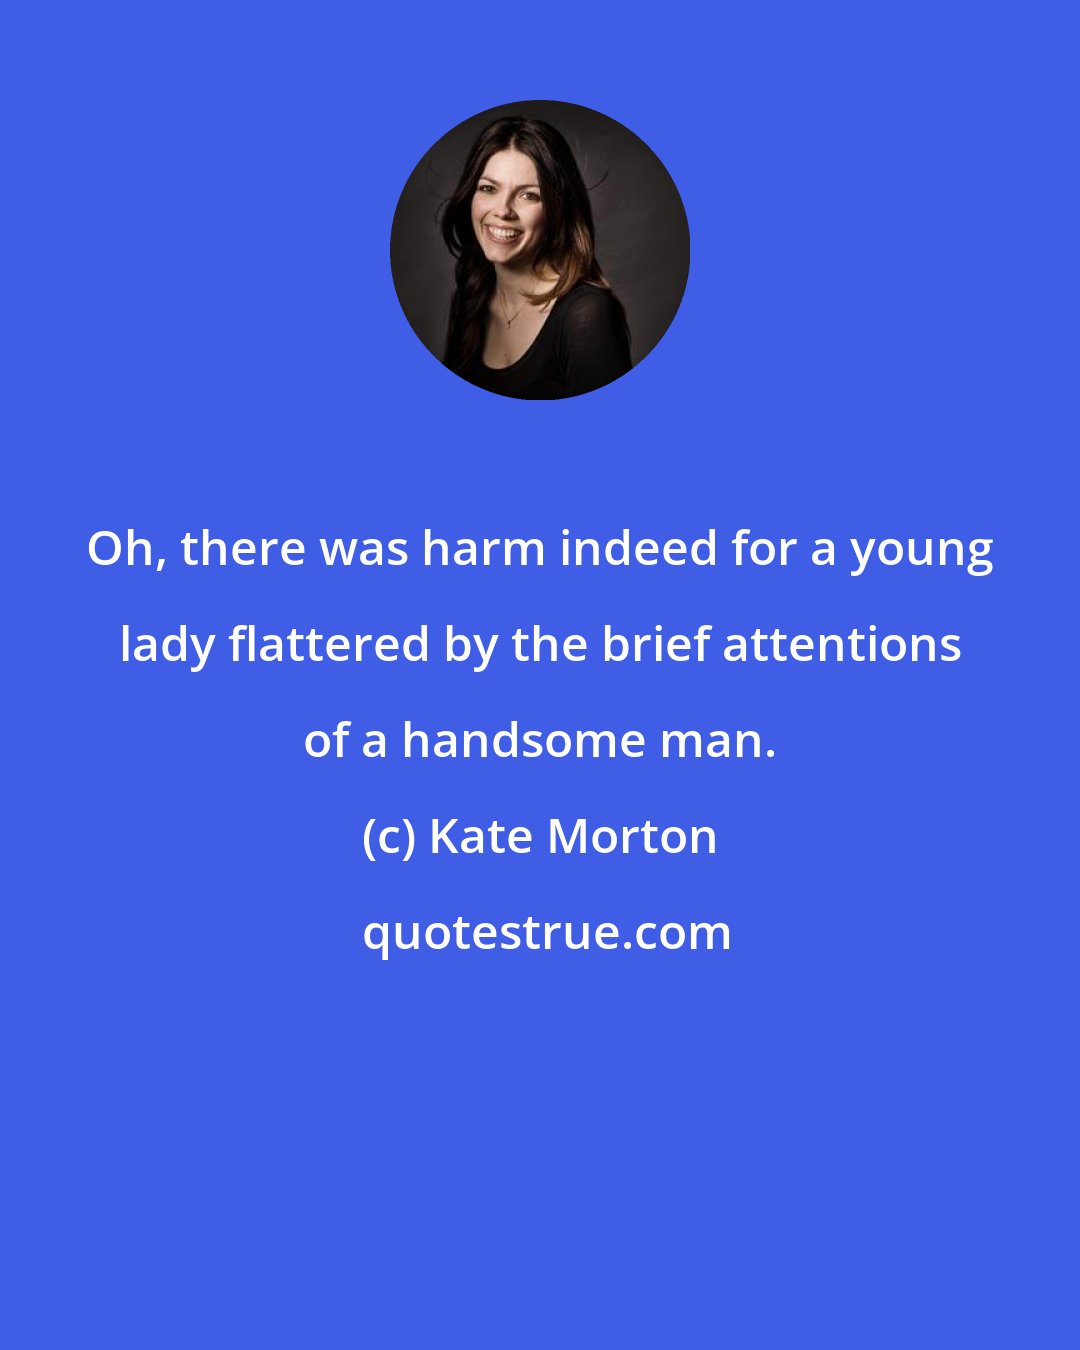 Kate Morton: Oh, there was harm indeed for a young lady flattered by the brief attentions of a handsome man.